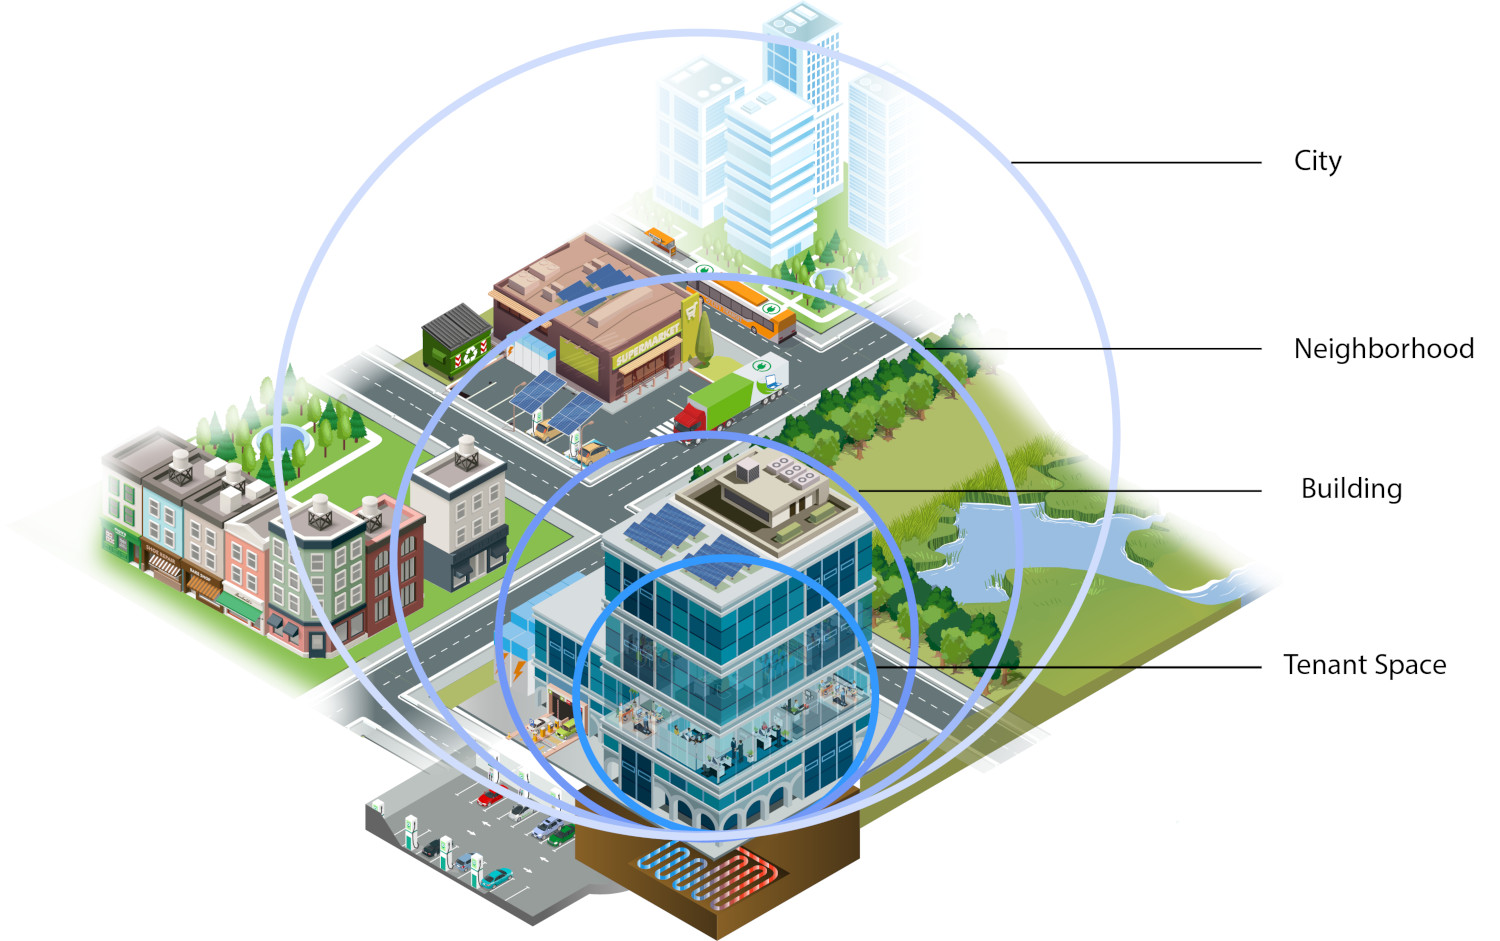 Image of a neighborhood showing concentric circles of systems:  tenant space, building, neighborhood, and city.